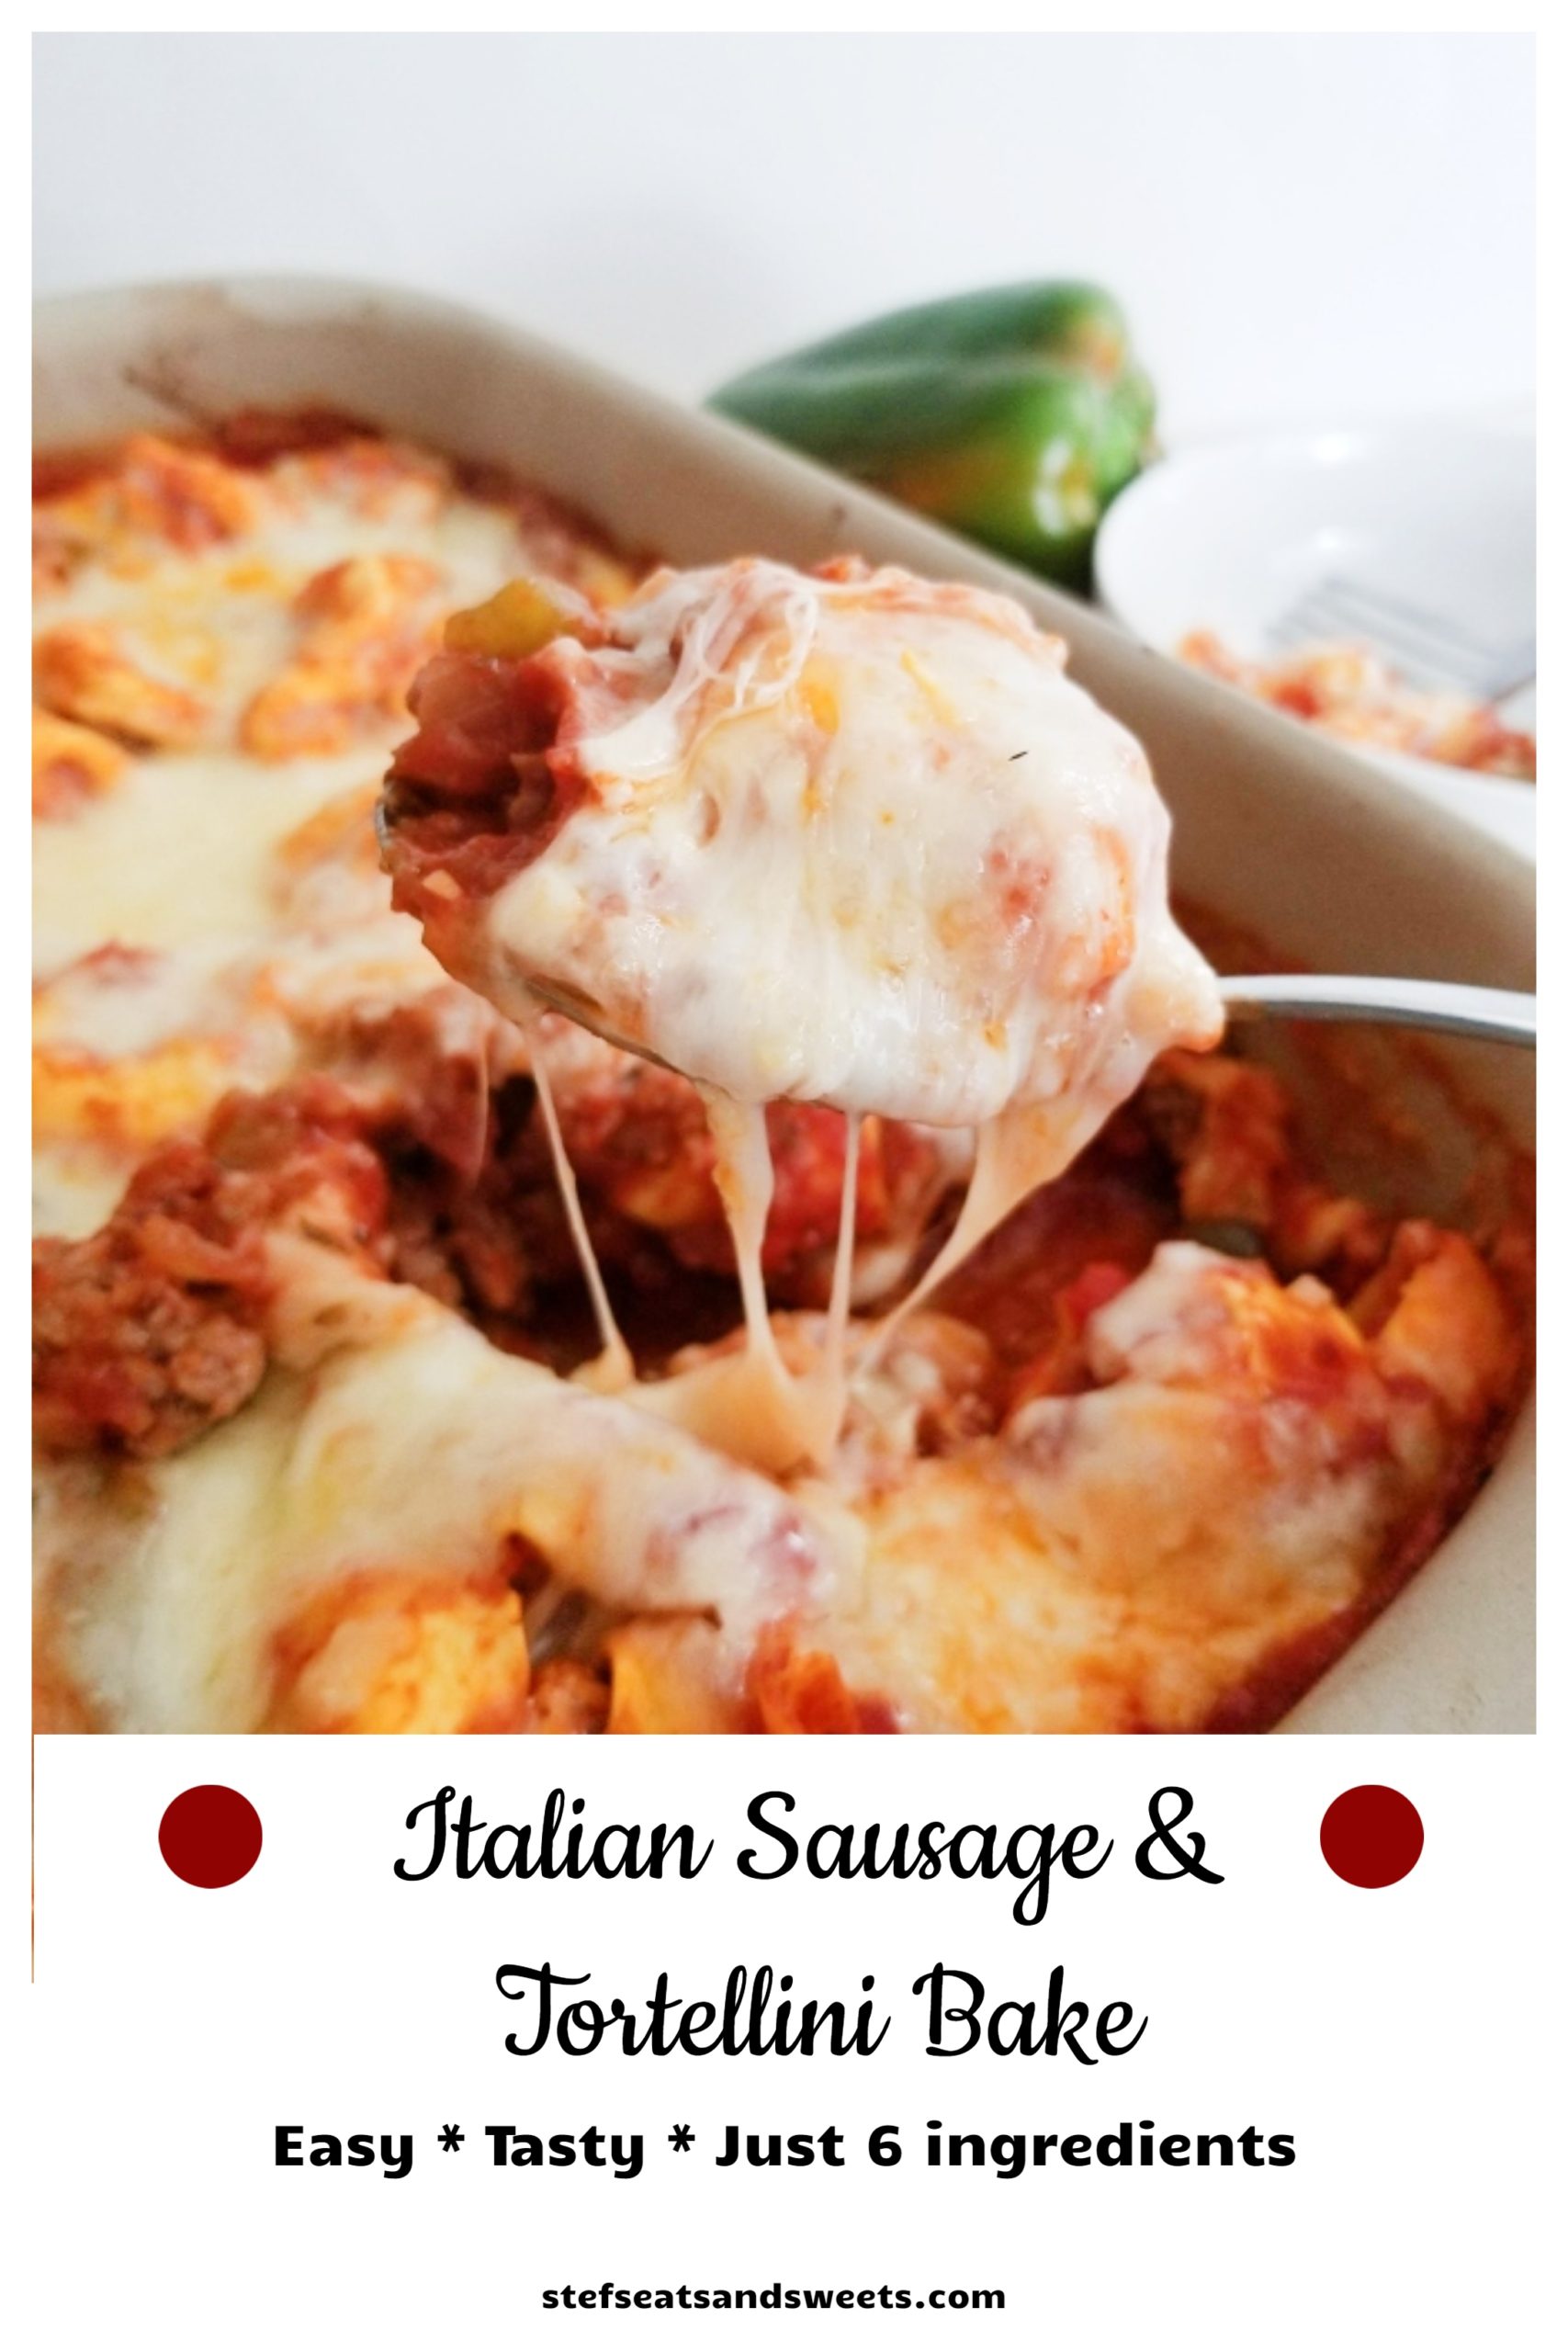 Italian Sausage & Tortellini Bake with text for Pinterest 